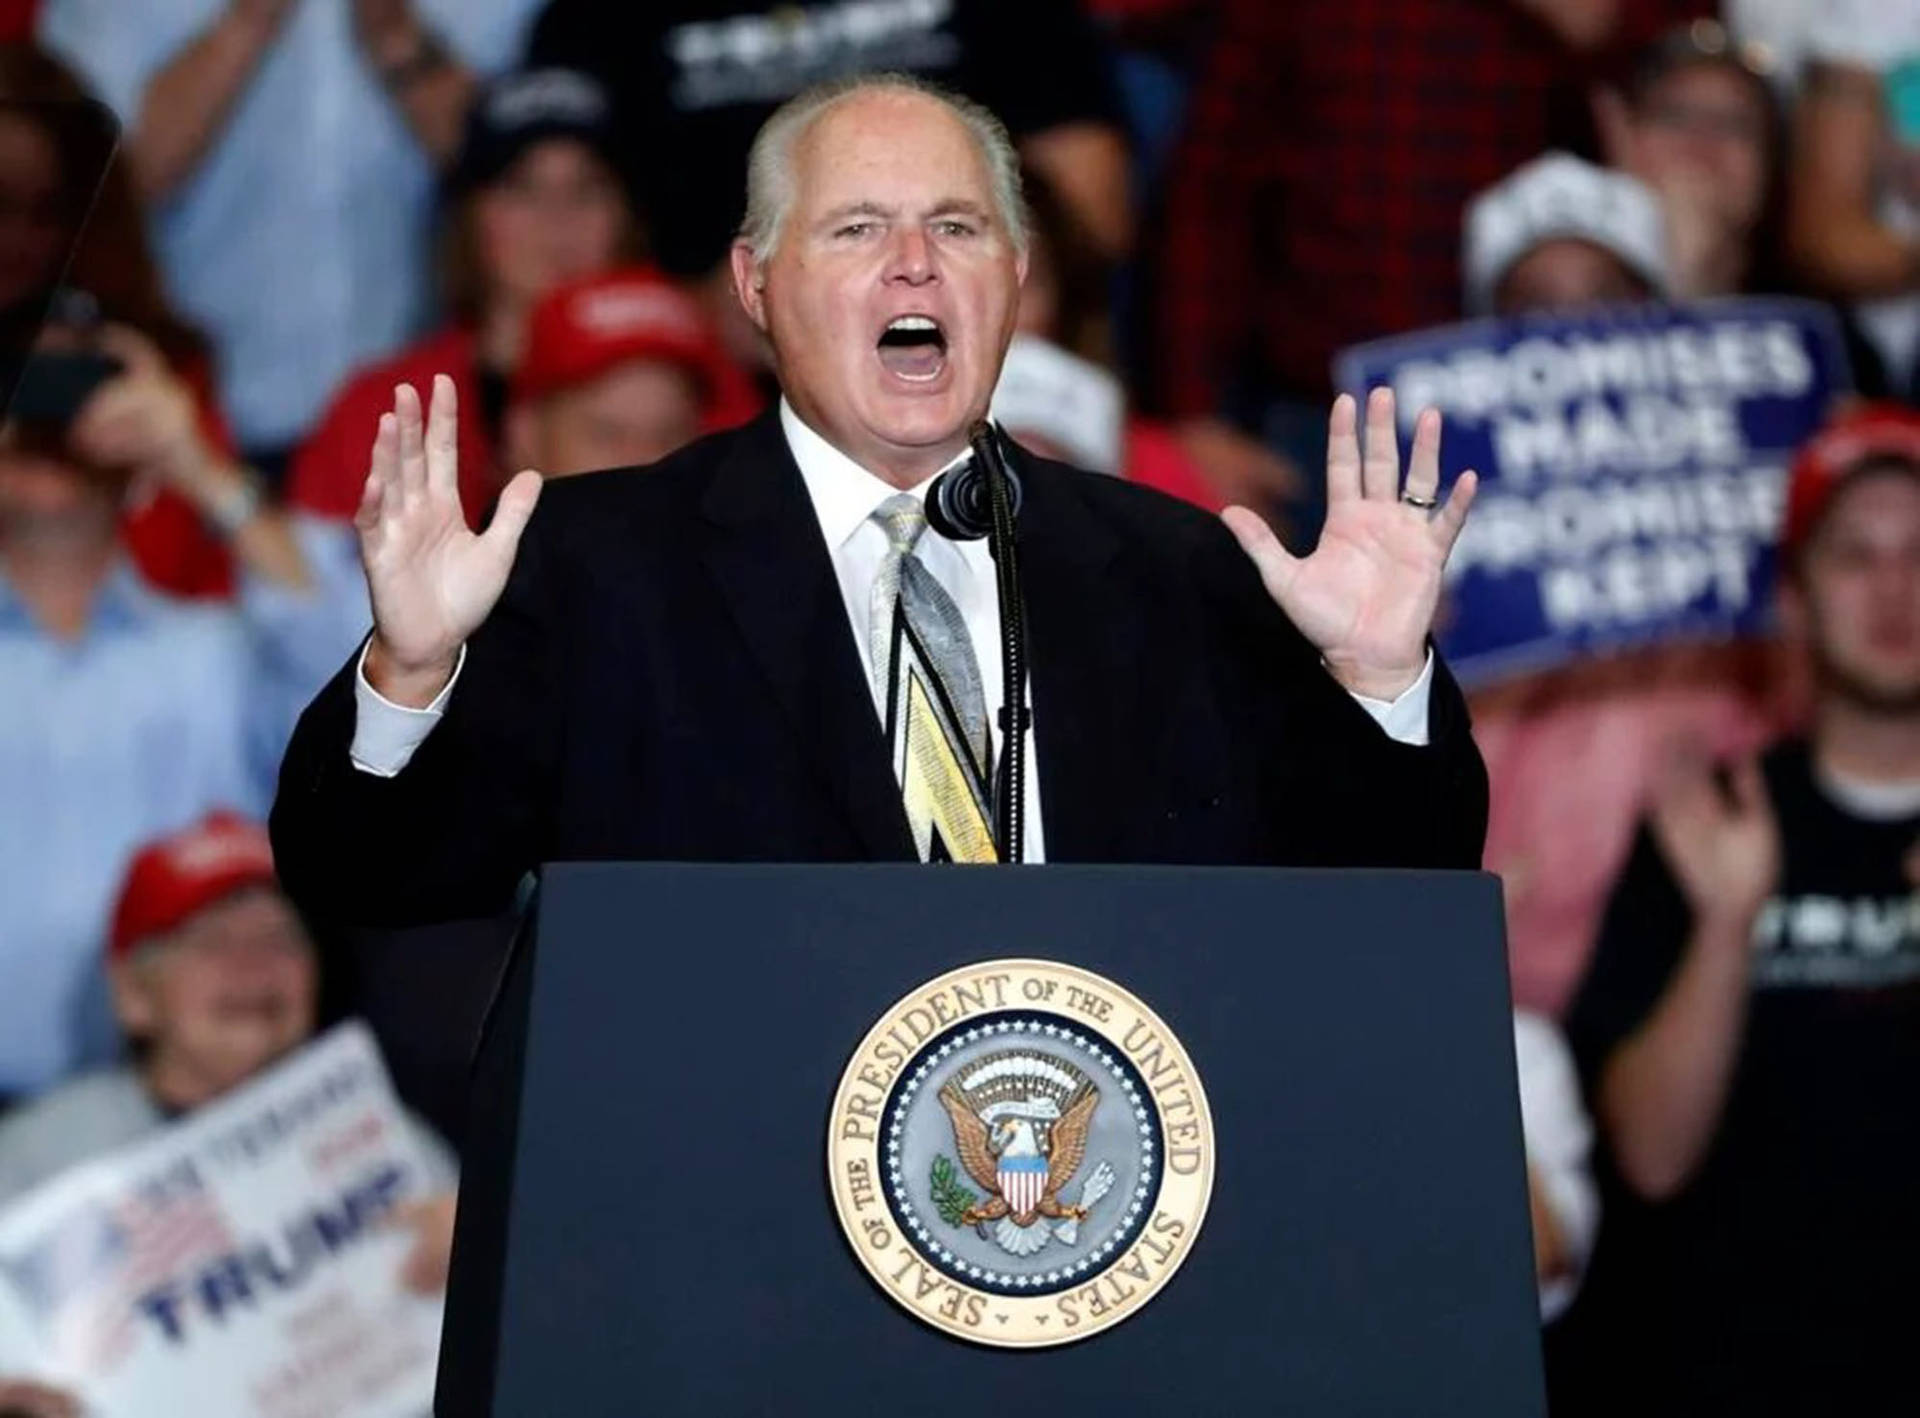 Rush Limbaugh At Campaign Rally Background